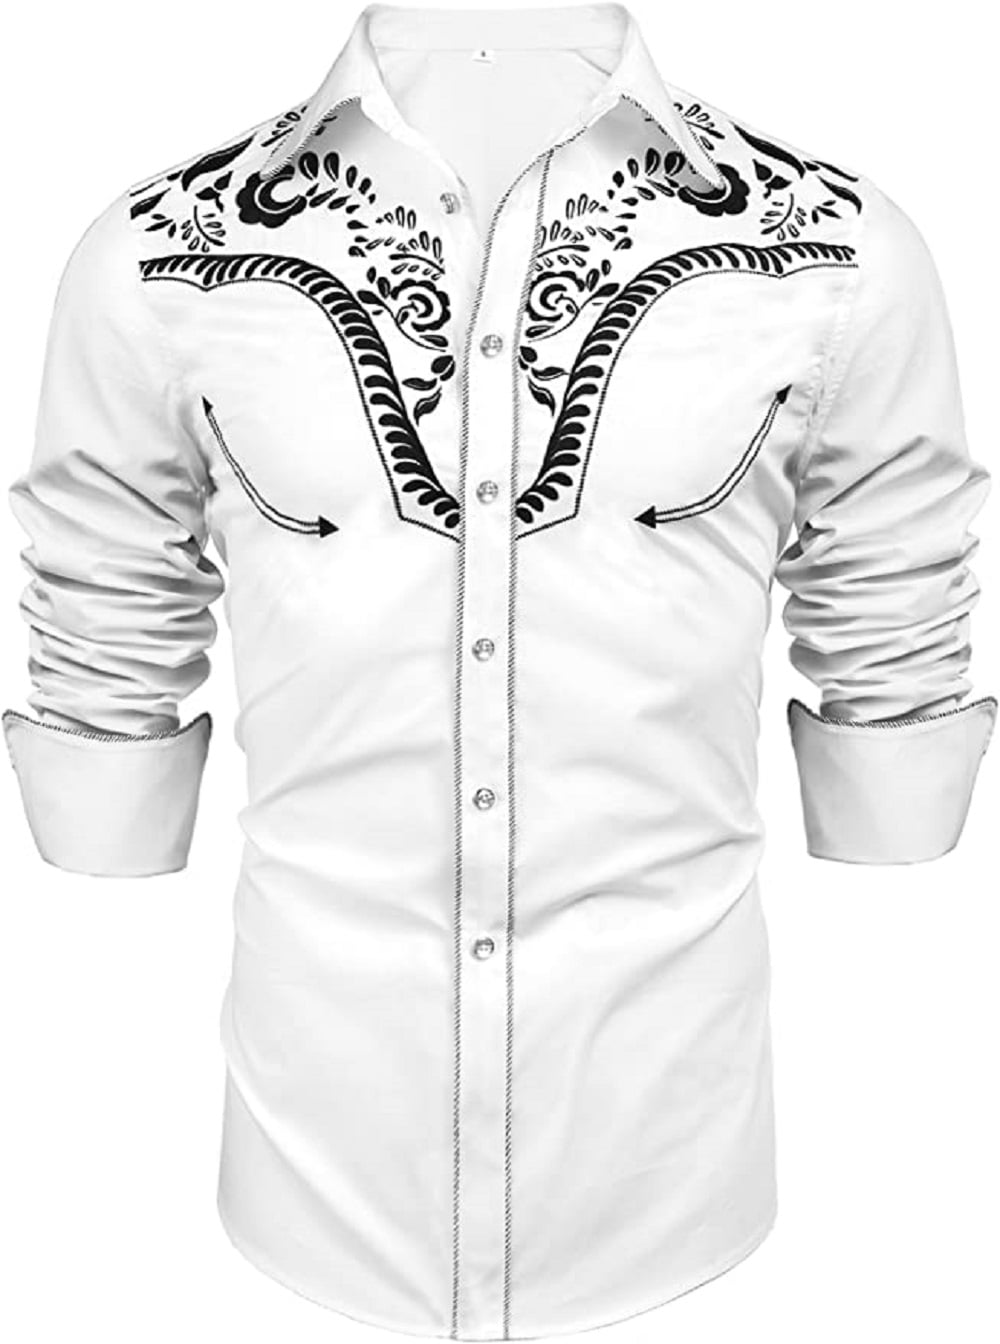 Daupanzees Slim Fit Shirts for Men Button Down Long Sleeve Embroidery ...